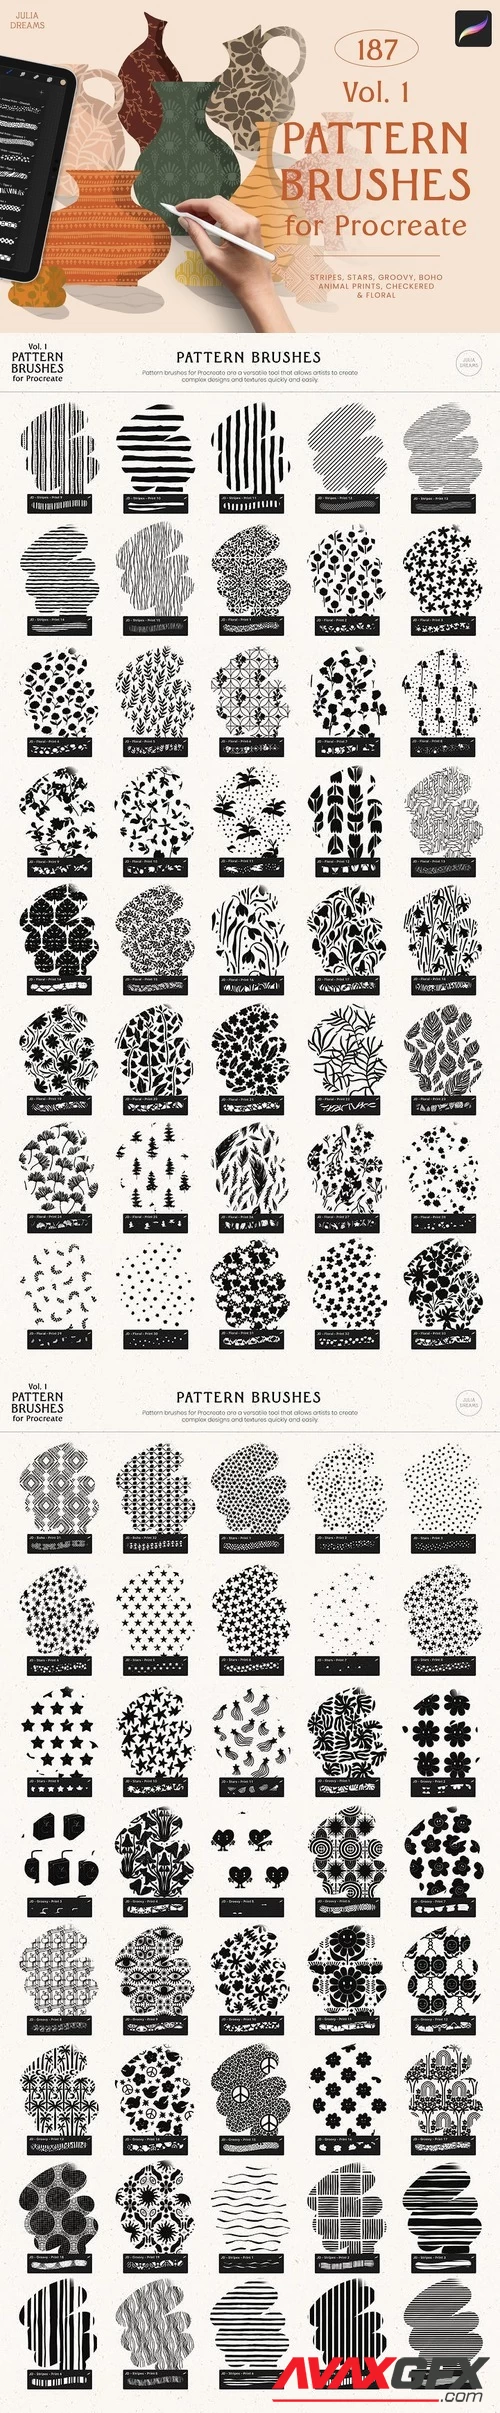 Pattern Brushes for Procreate Vol 1